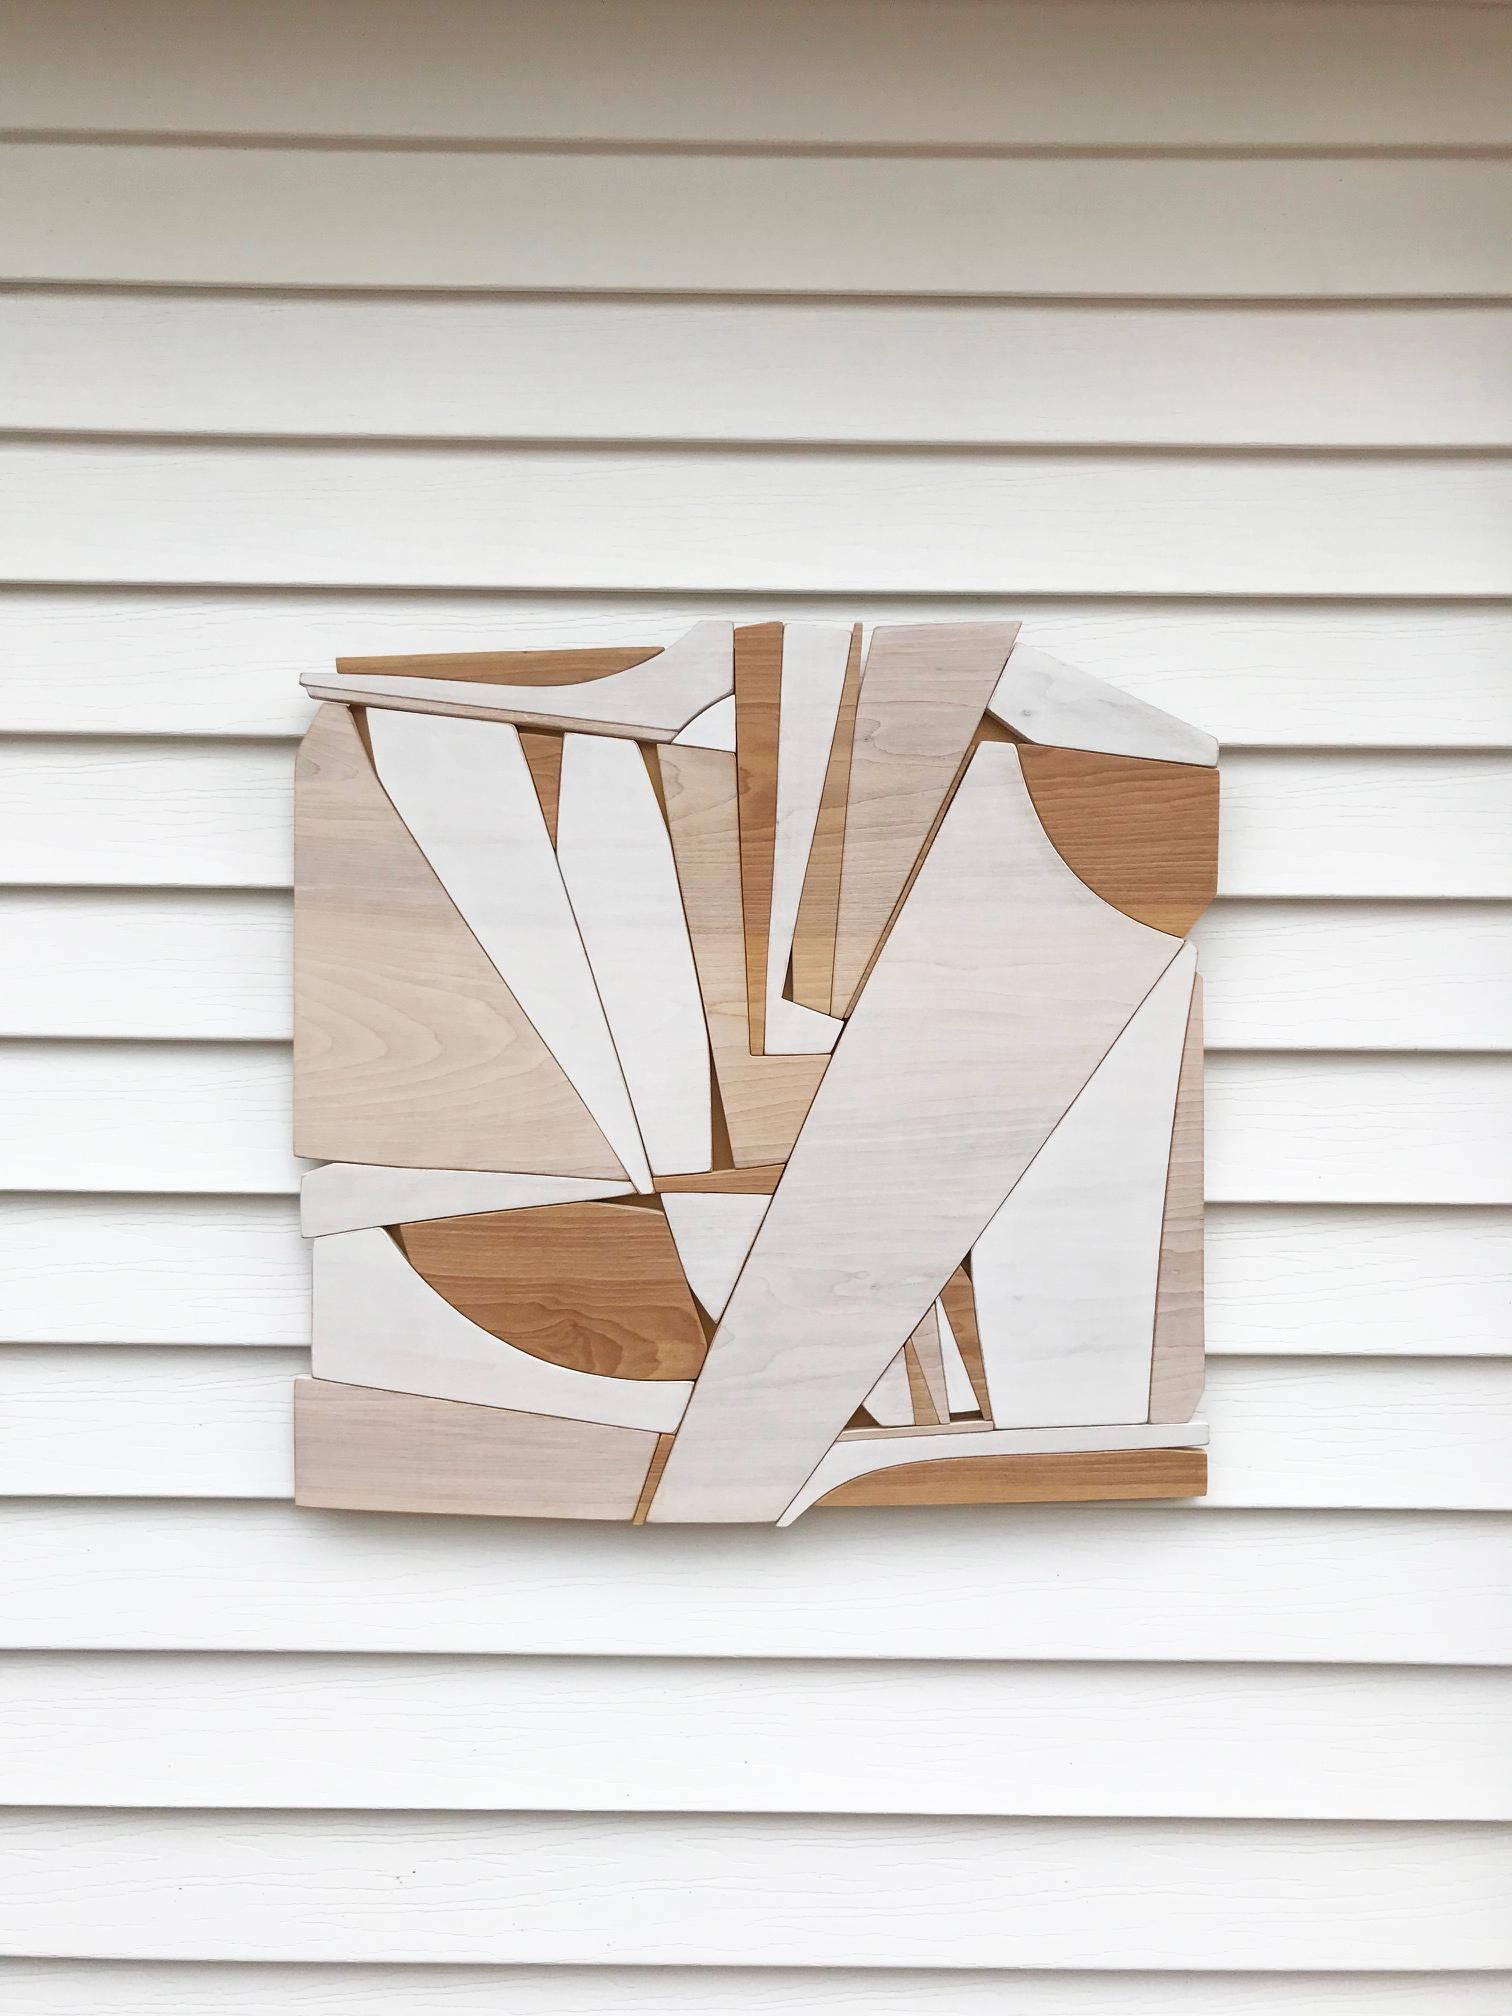 Leisure Class is a discreet and elegant minimalist contemporary wall sculpture. It is
constructed with birch panels, acrylic washes and completed with a hand waxed
finish. The acrylic wash allows the wood grain to show through the paint and